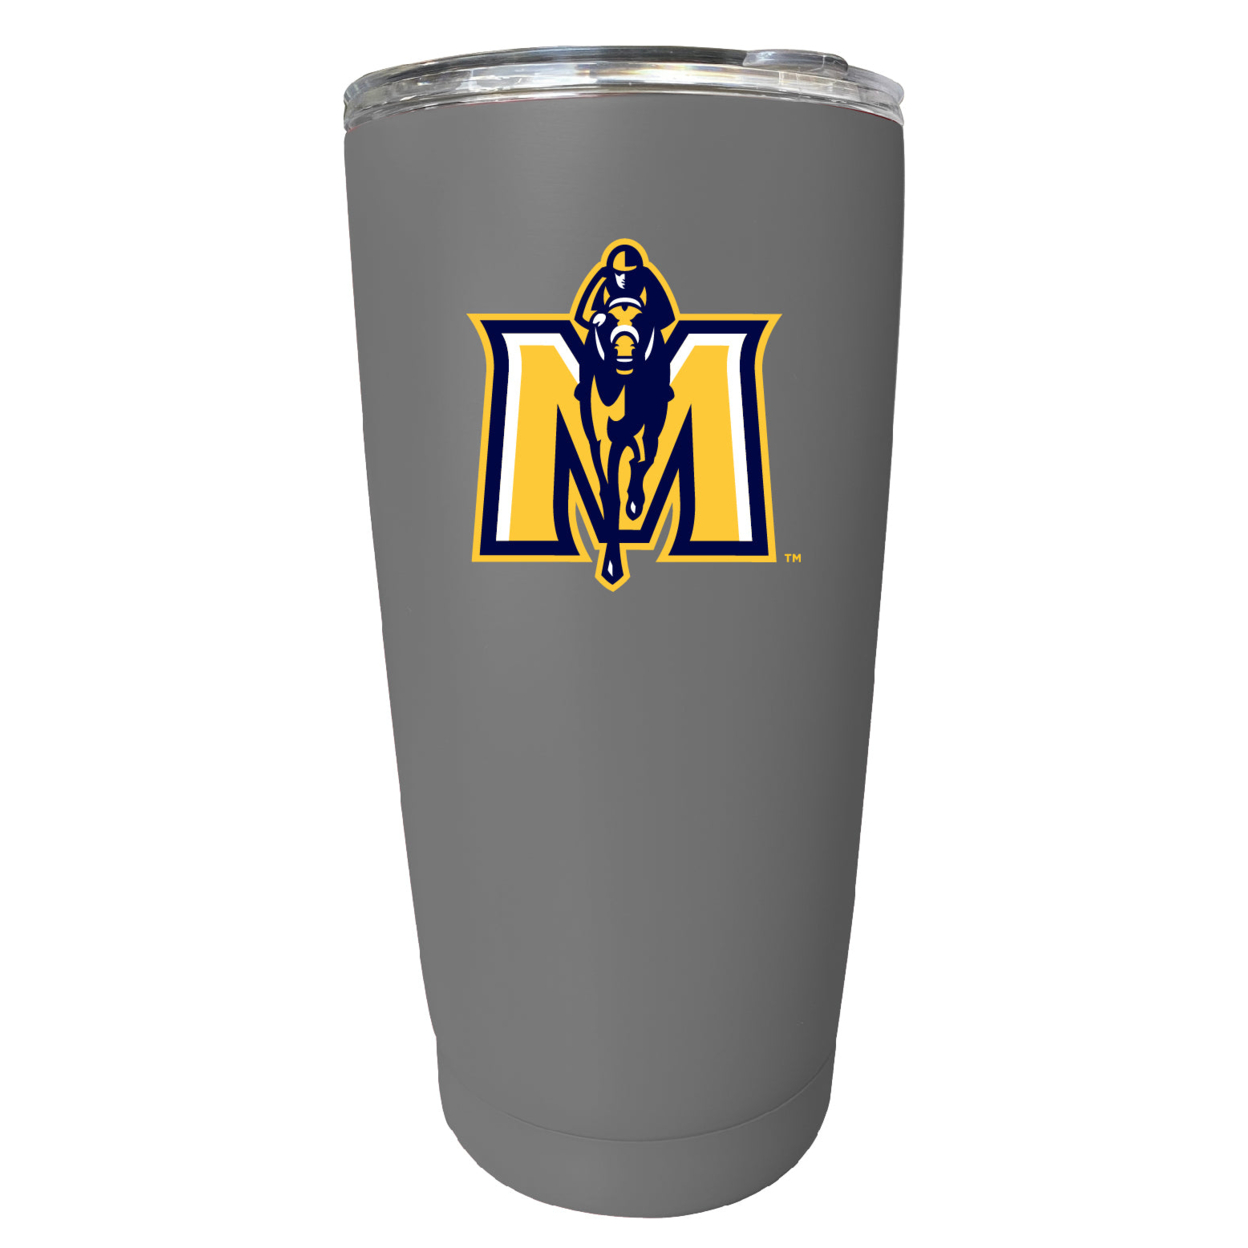 Murray State University 16 Oz Stainless Steel Insulated Tumbler - Gray